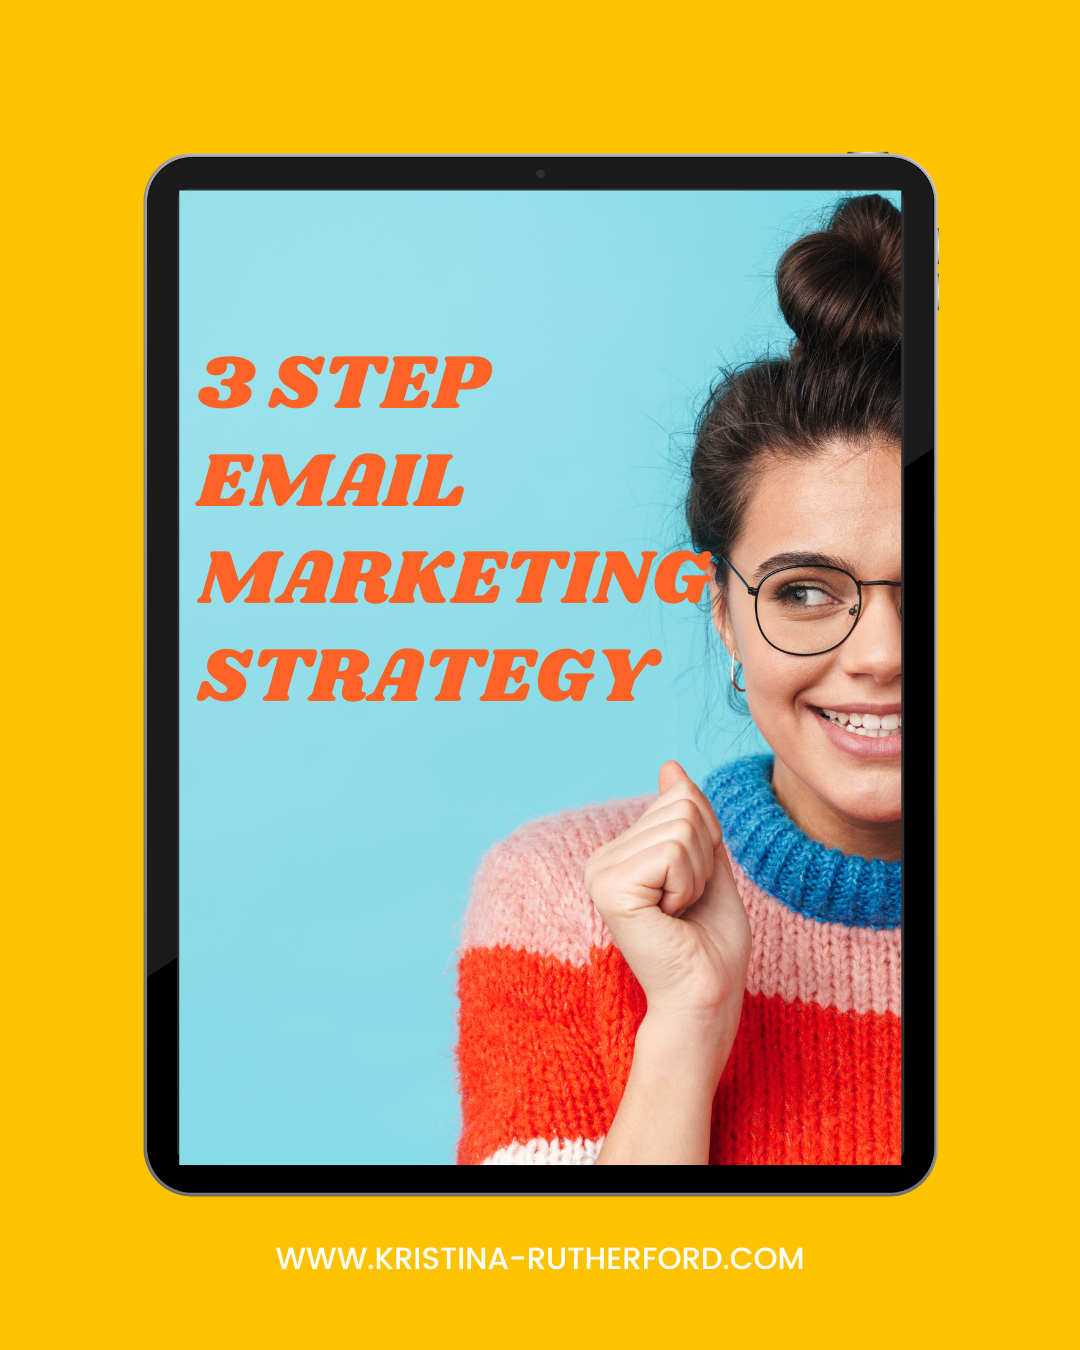 3 step email marketing strategy for small business owners